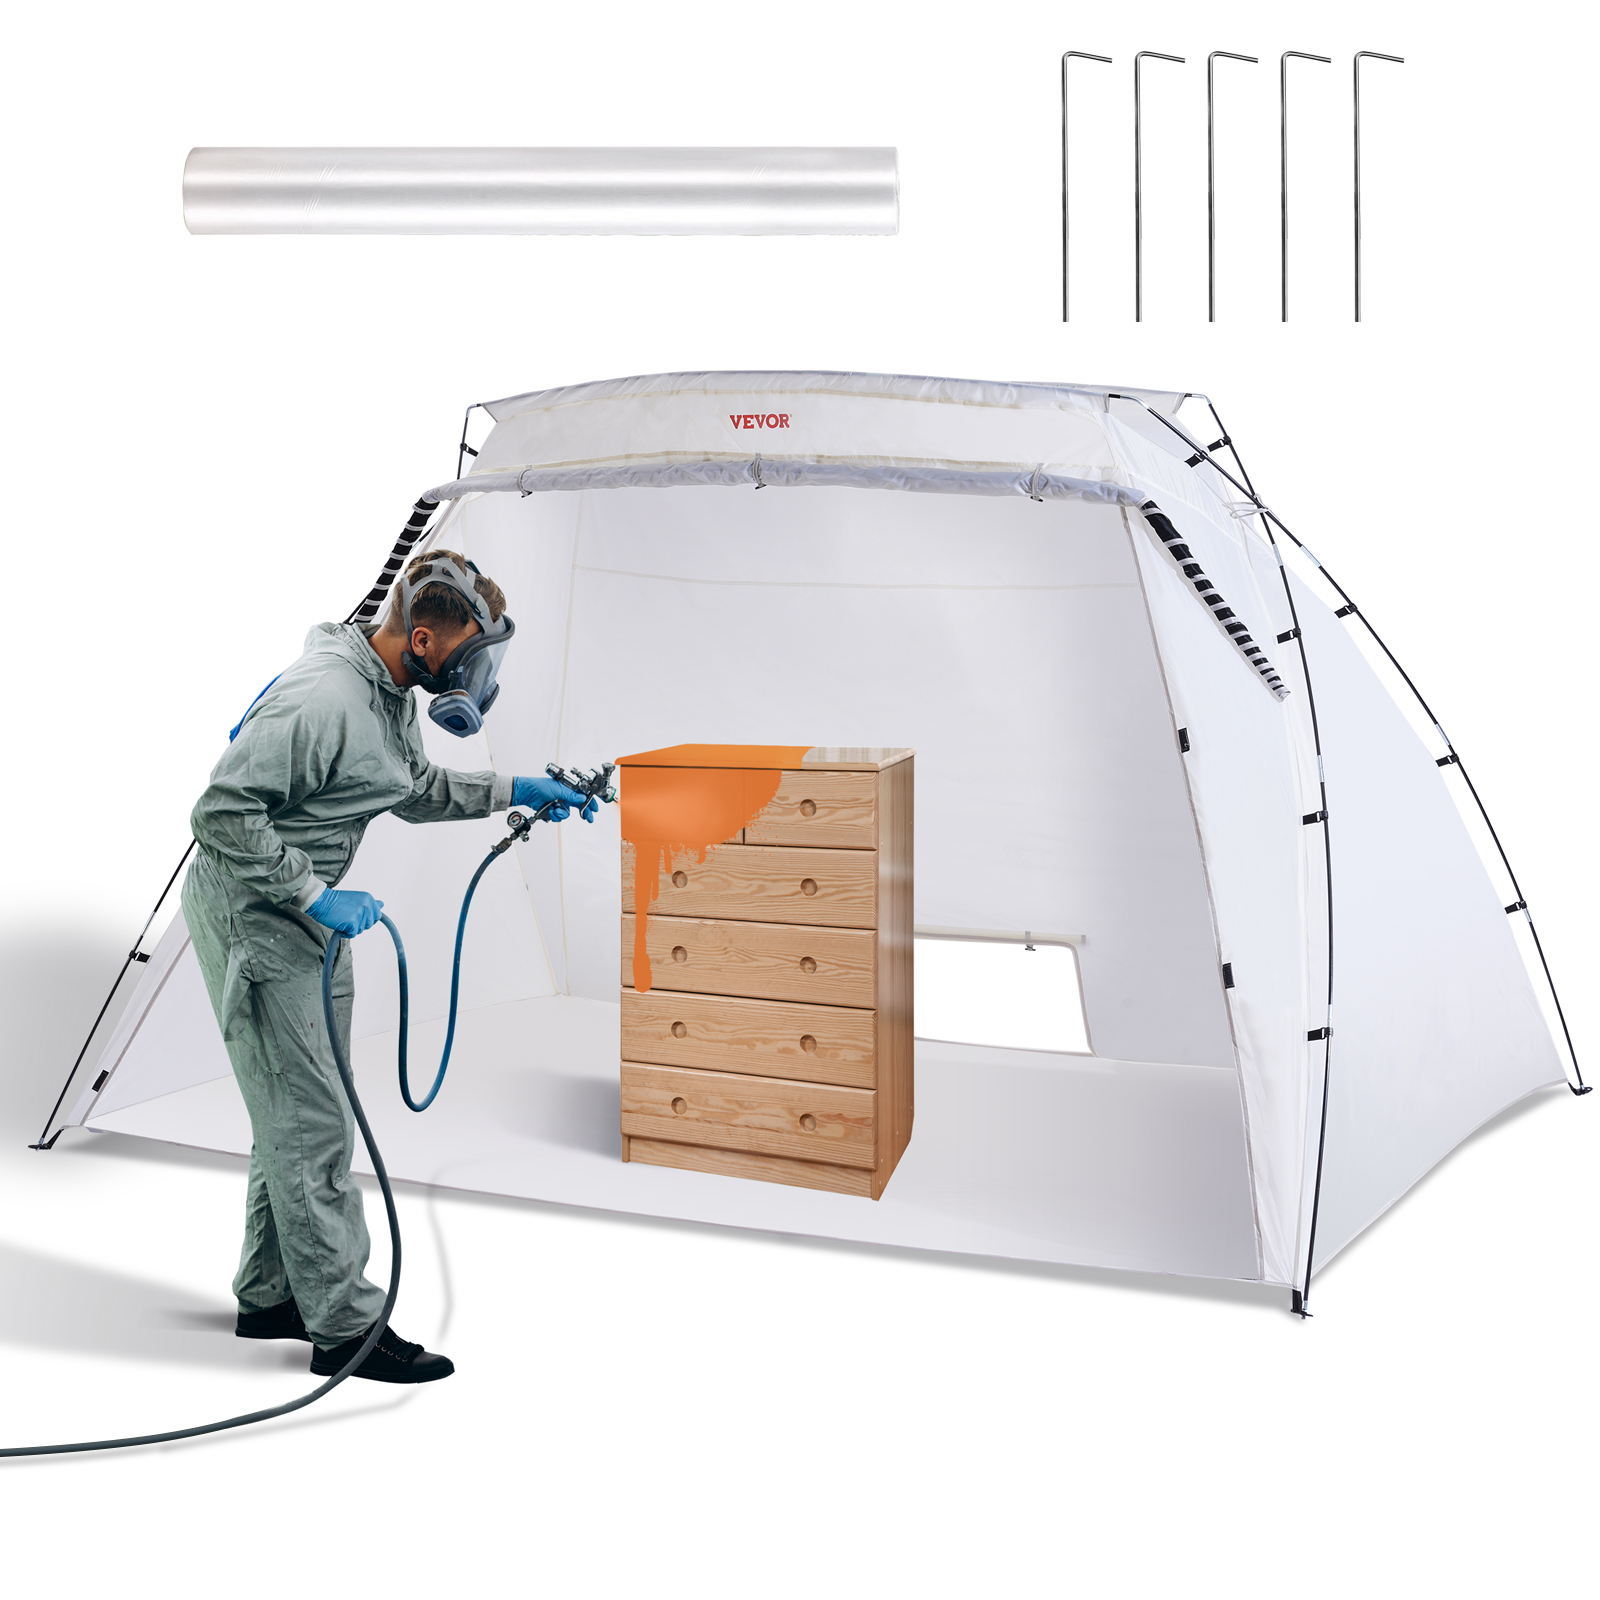 Paint Spray Tent,Spray Shelter,Spray Paint Booth